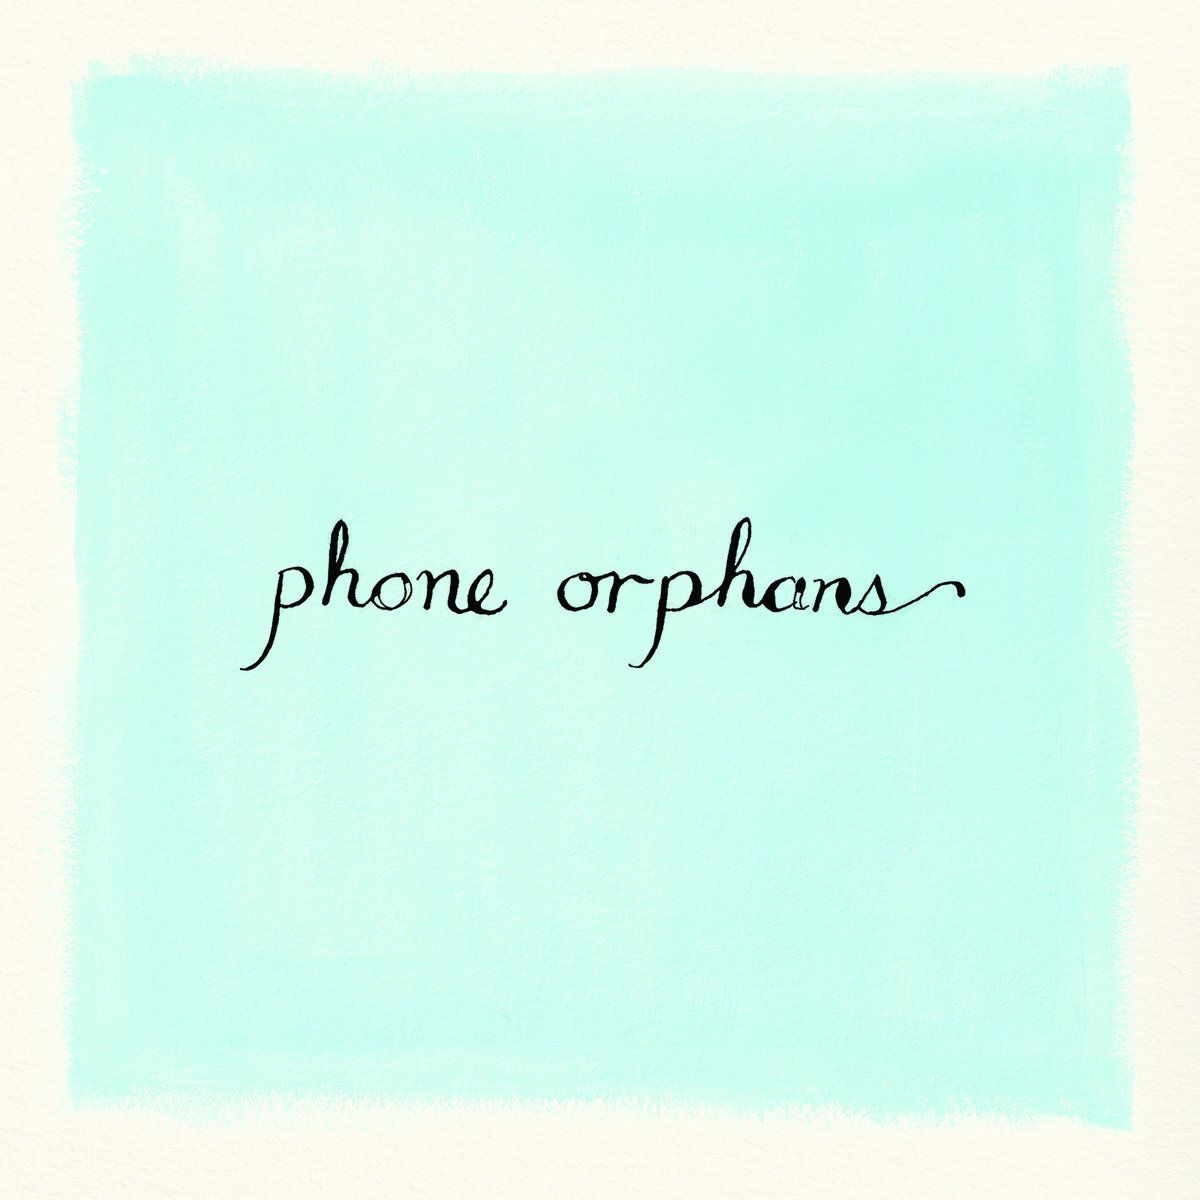 Hang up! ‘Phone Orphans’ is on the line